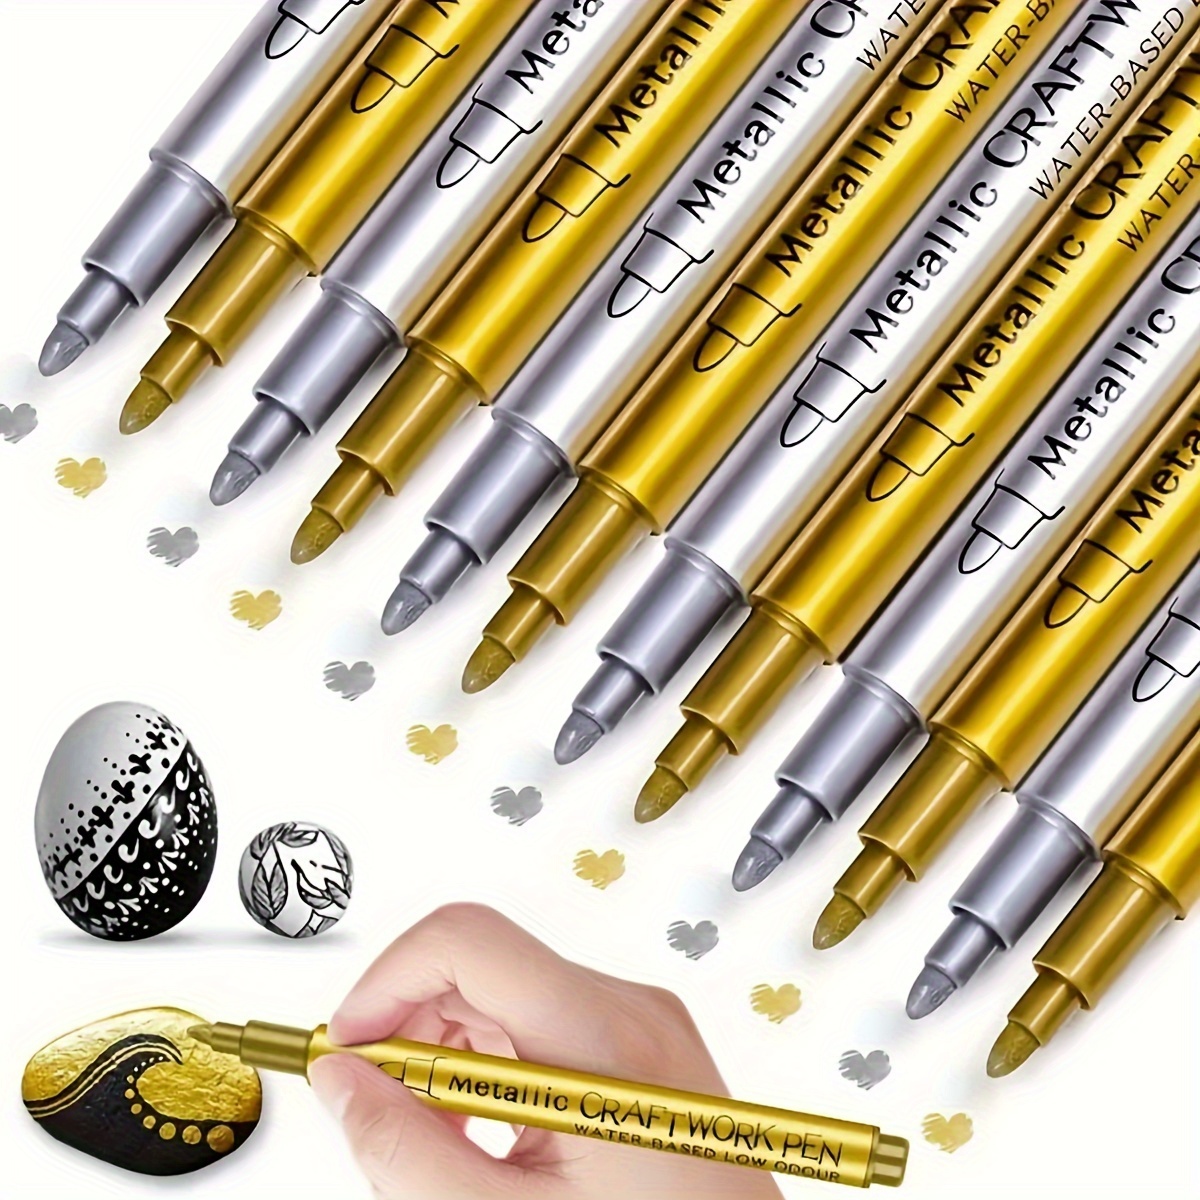 12PCS Silver/ Gold Metallic Marker Pen diy Photo Album Scrapbooking Crafts  Watery Art Markers For Card Making